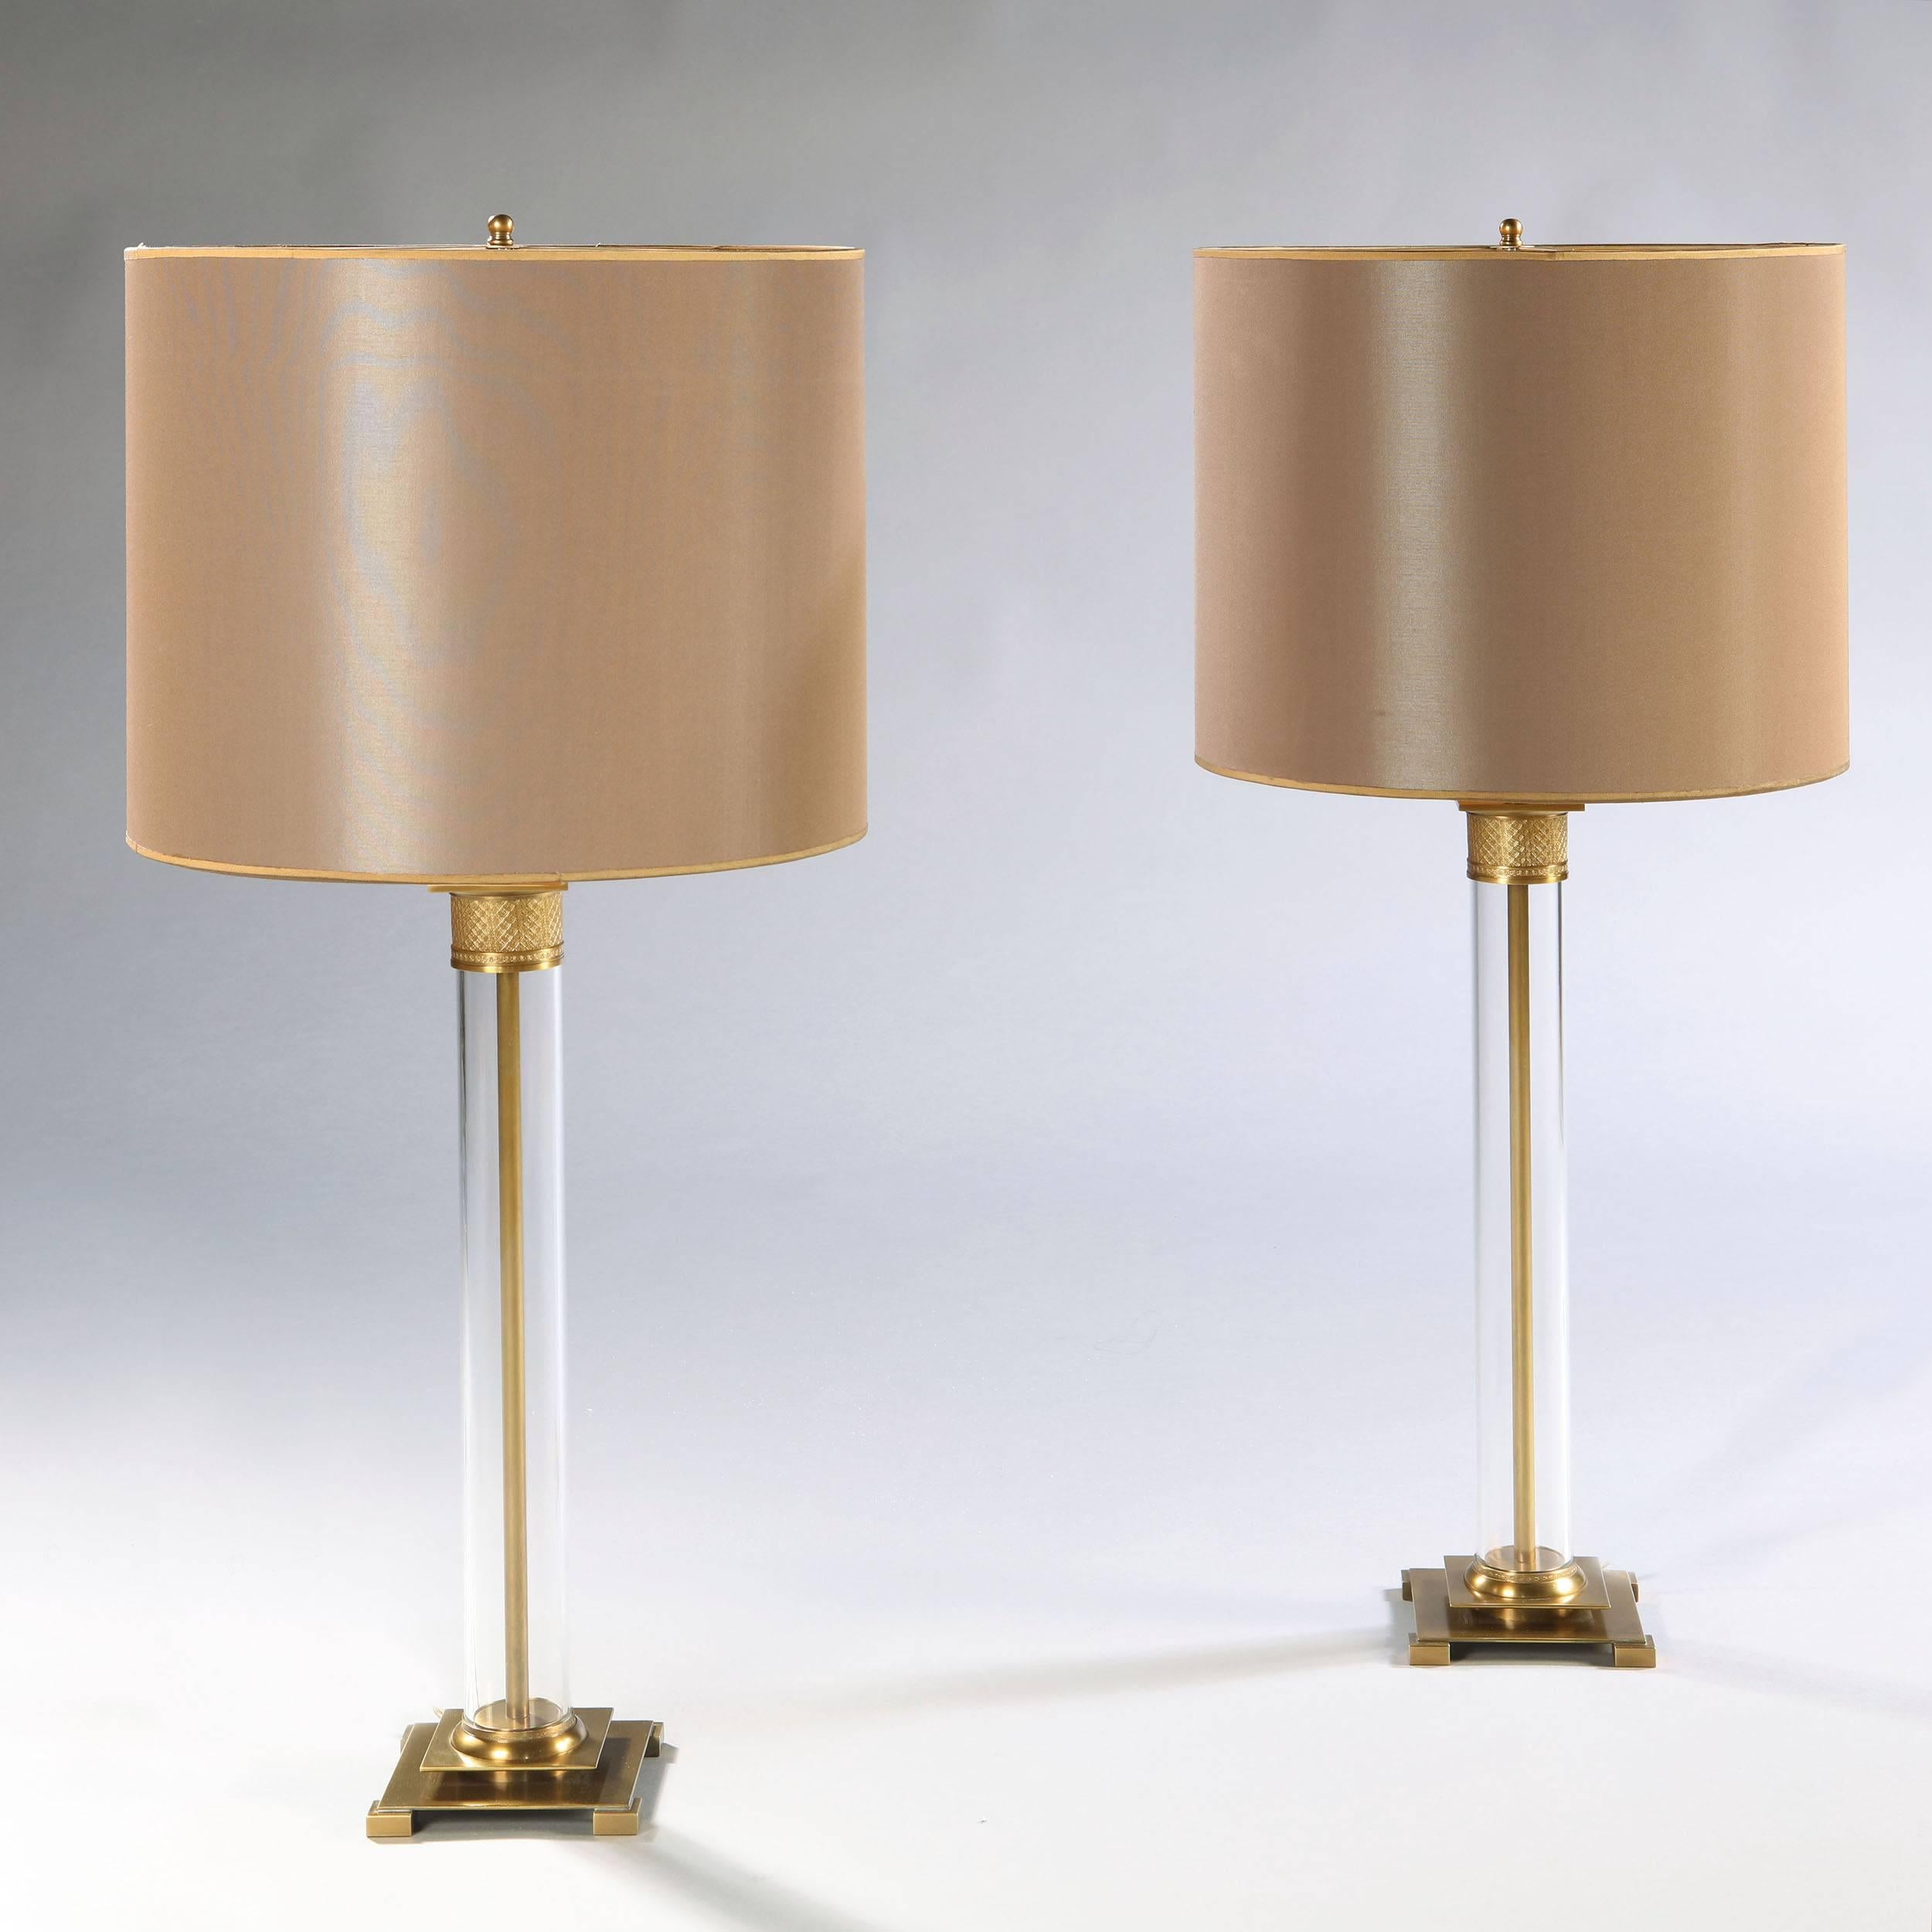 An early twentieth century pair of perspex lamps with brass mounts, telescopic double bulb fittings and brass finials, with bespoke silk shades.